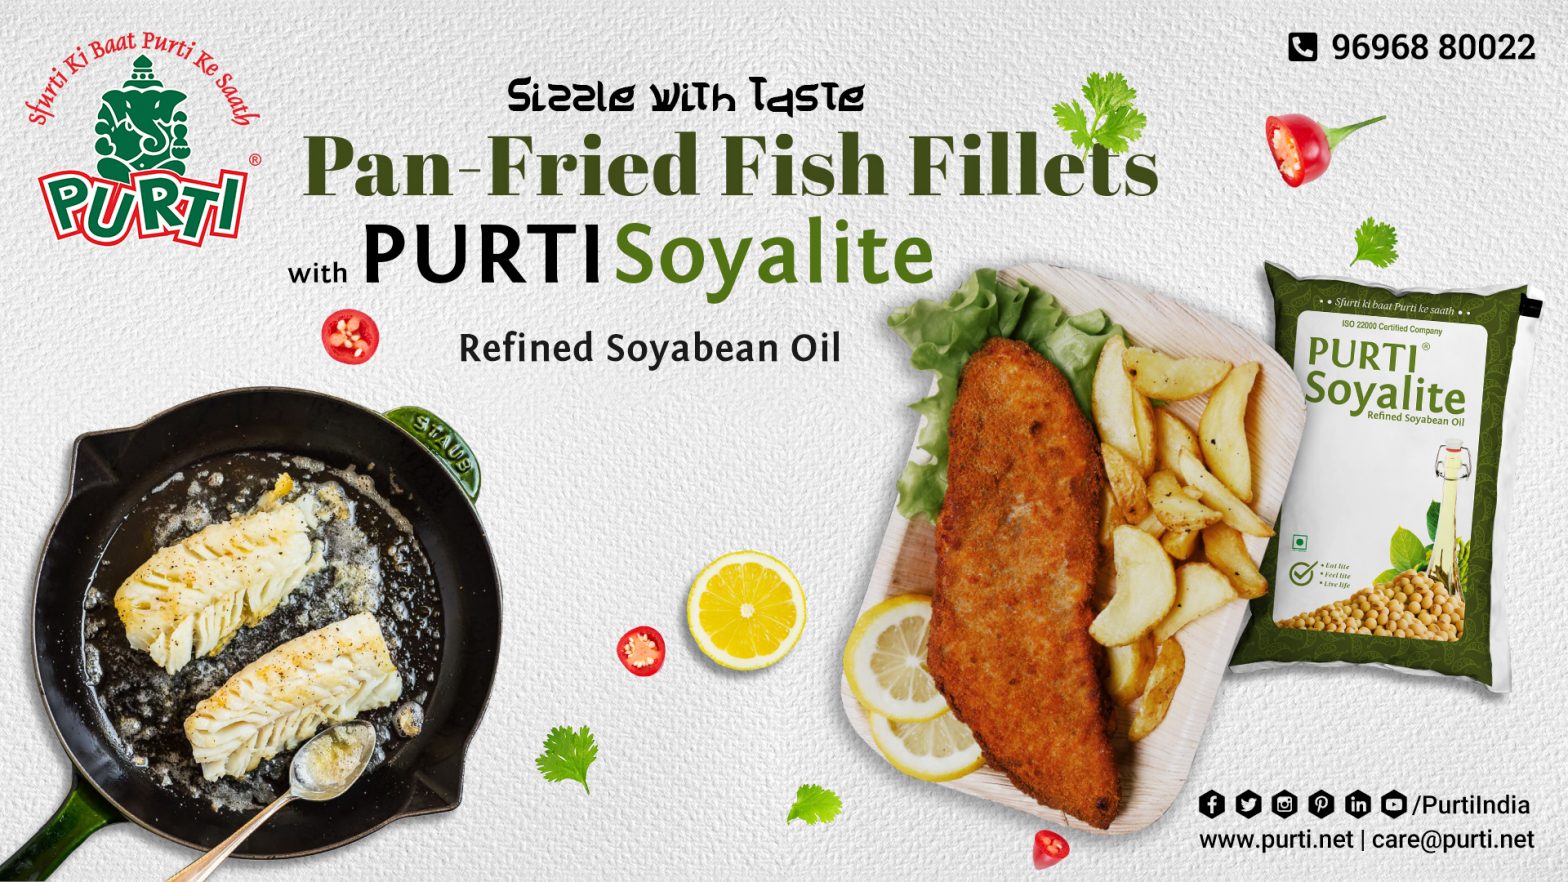 Sizzle with Taste: Speedy Pan-Fried Fish Fillets with Purti Soyalite Refined Soybean Oil